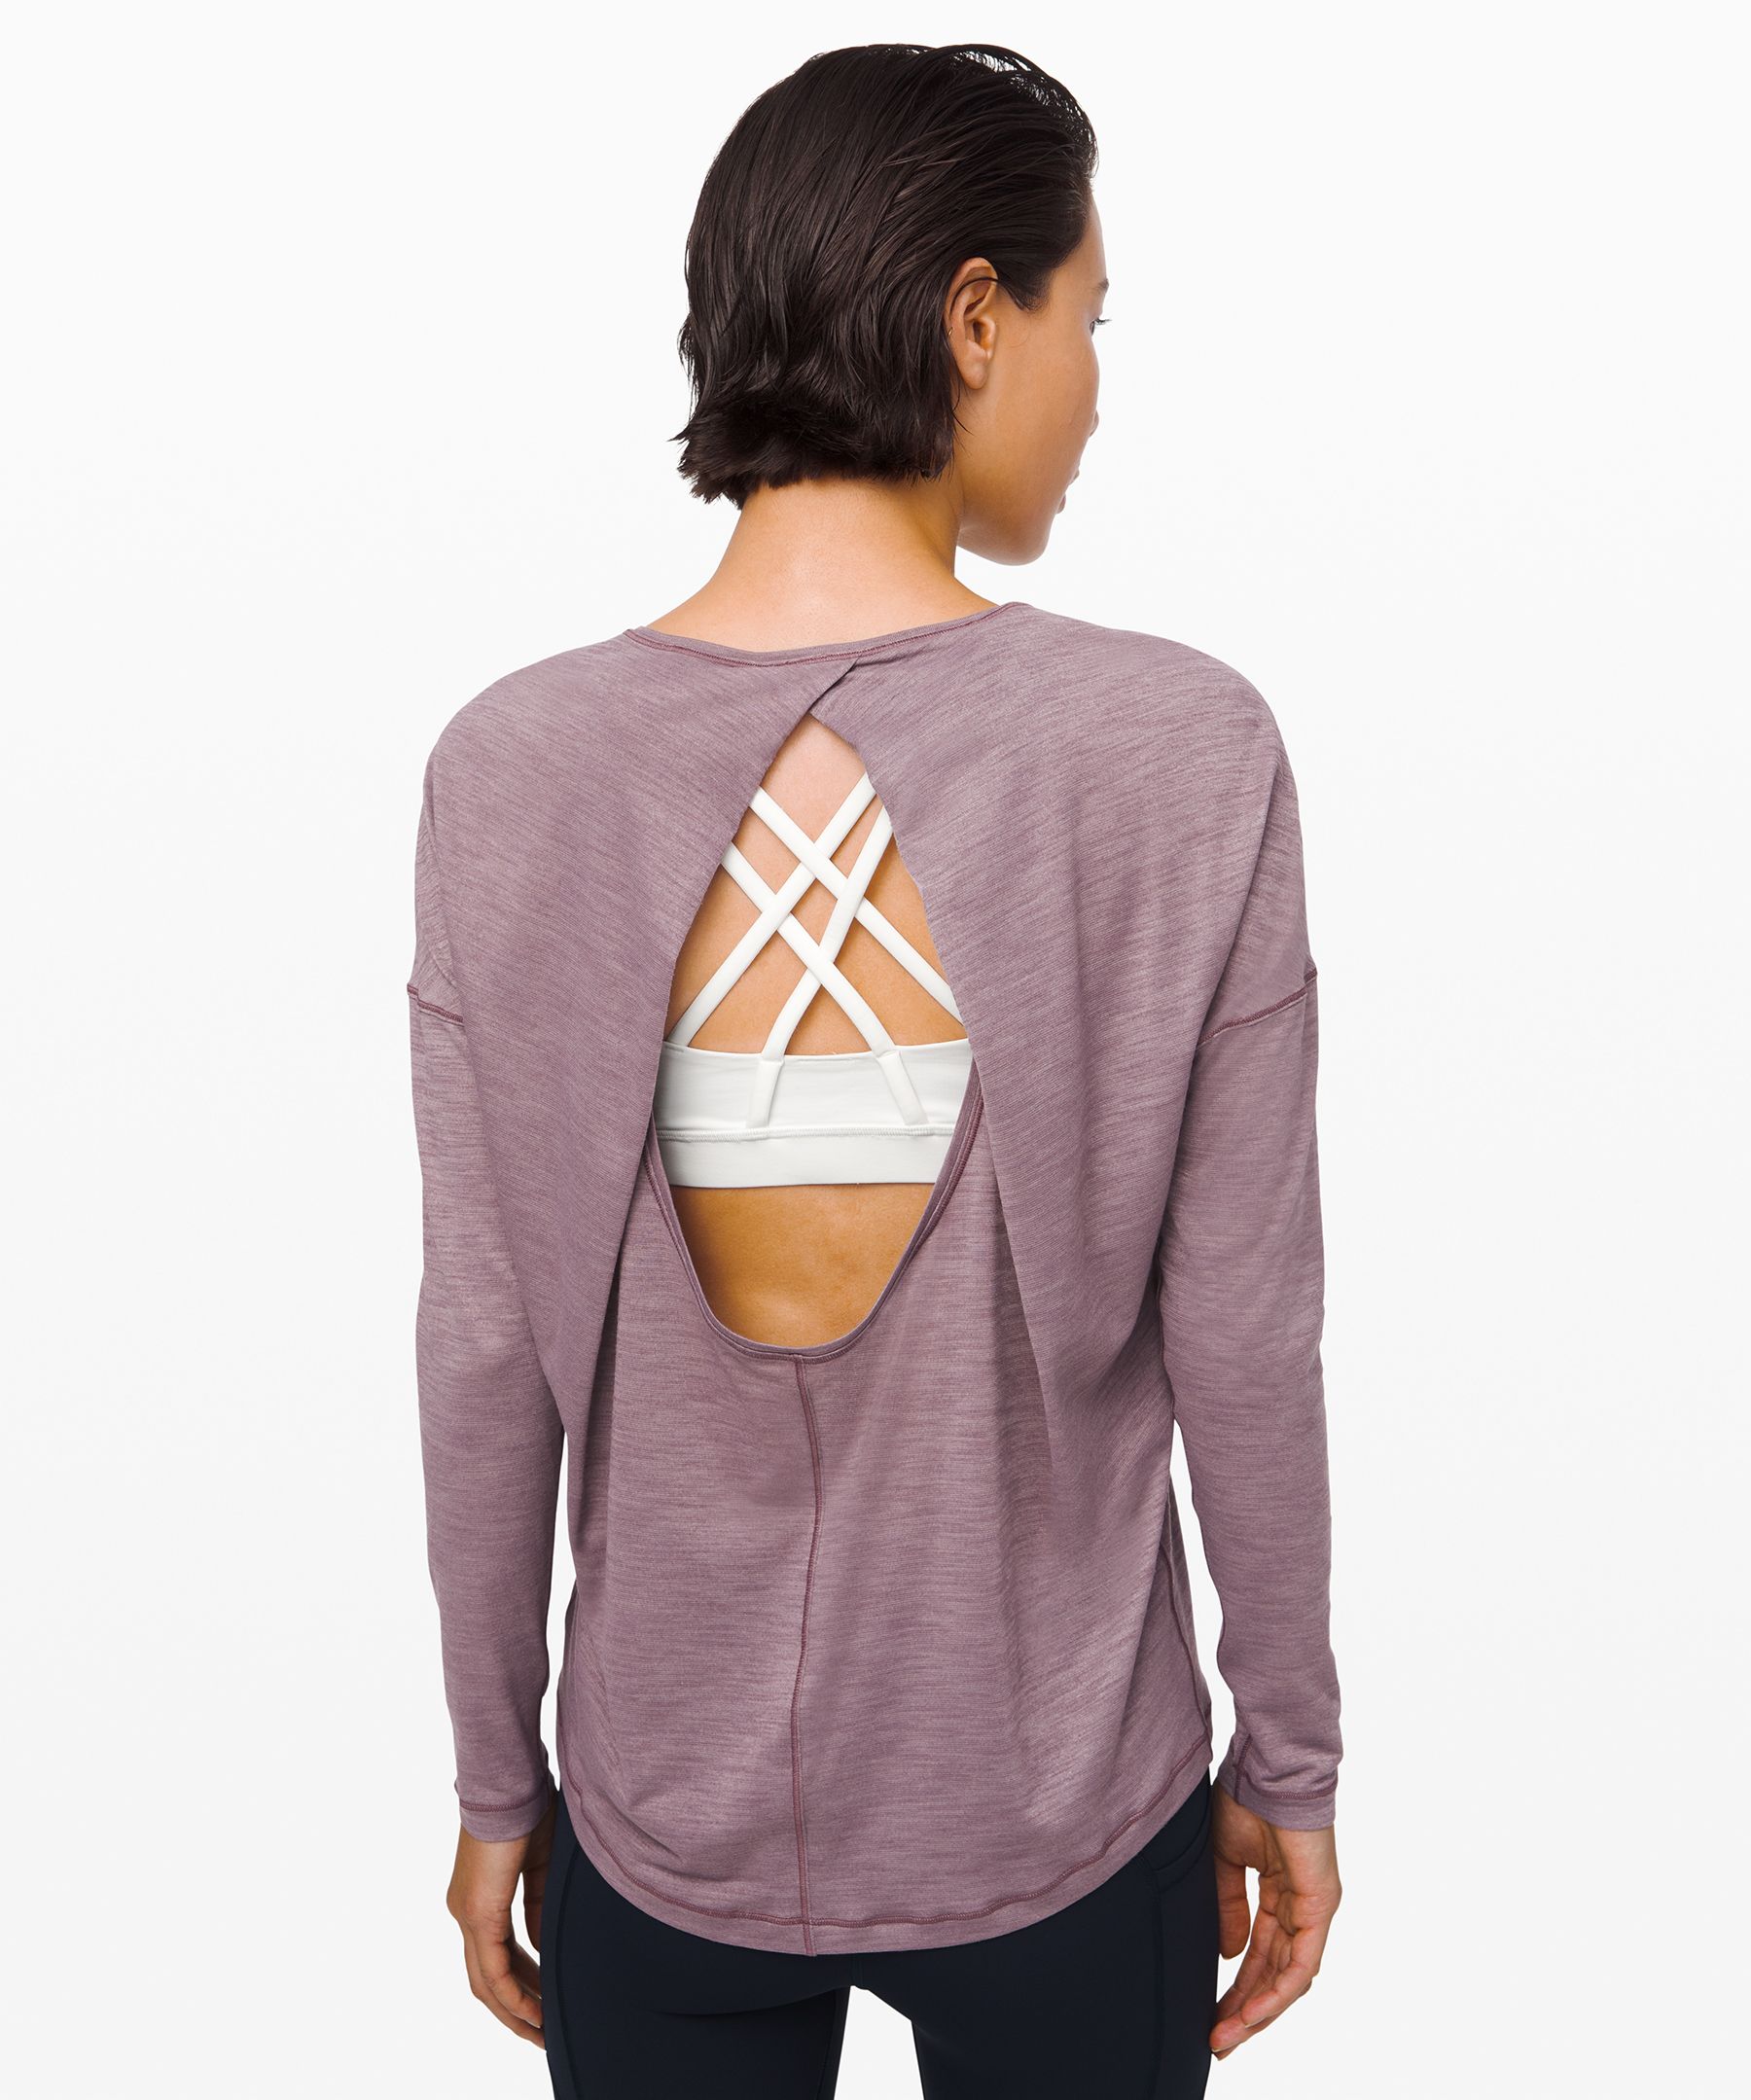 Lululemon Get Set Long Sleeve In Spaced Out Space Dye Black White